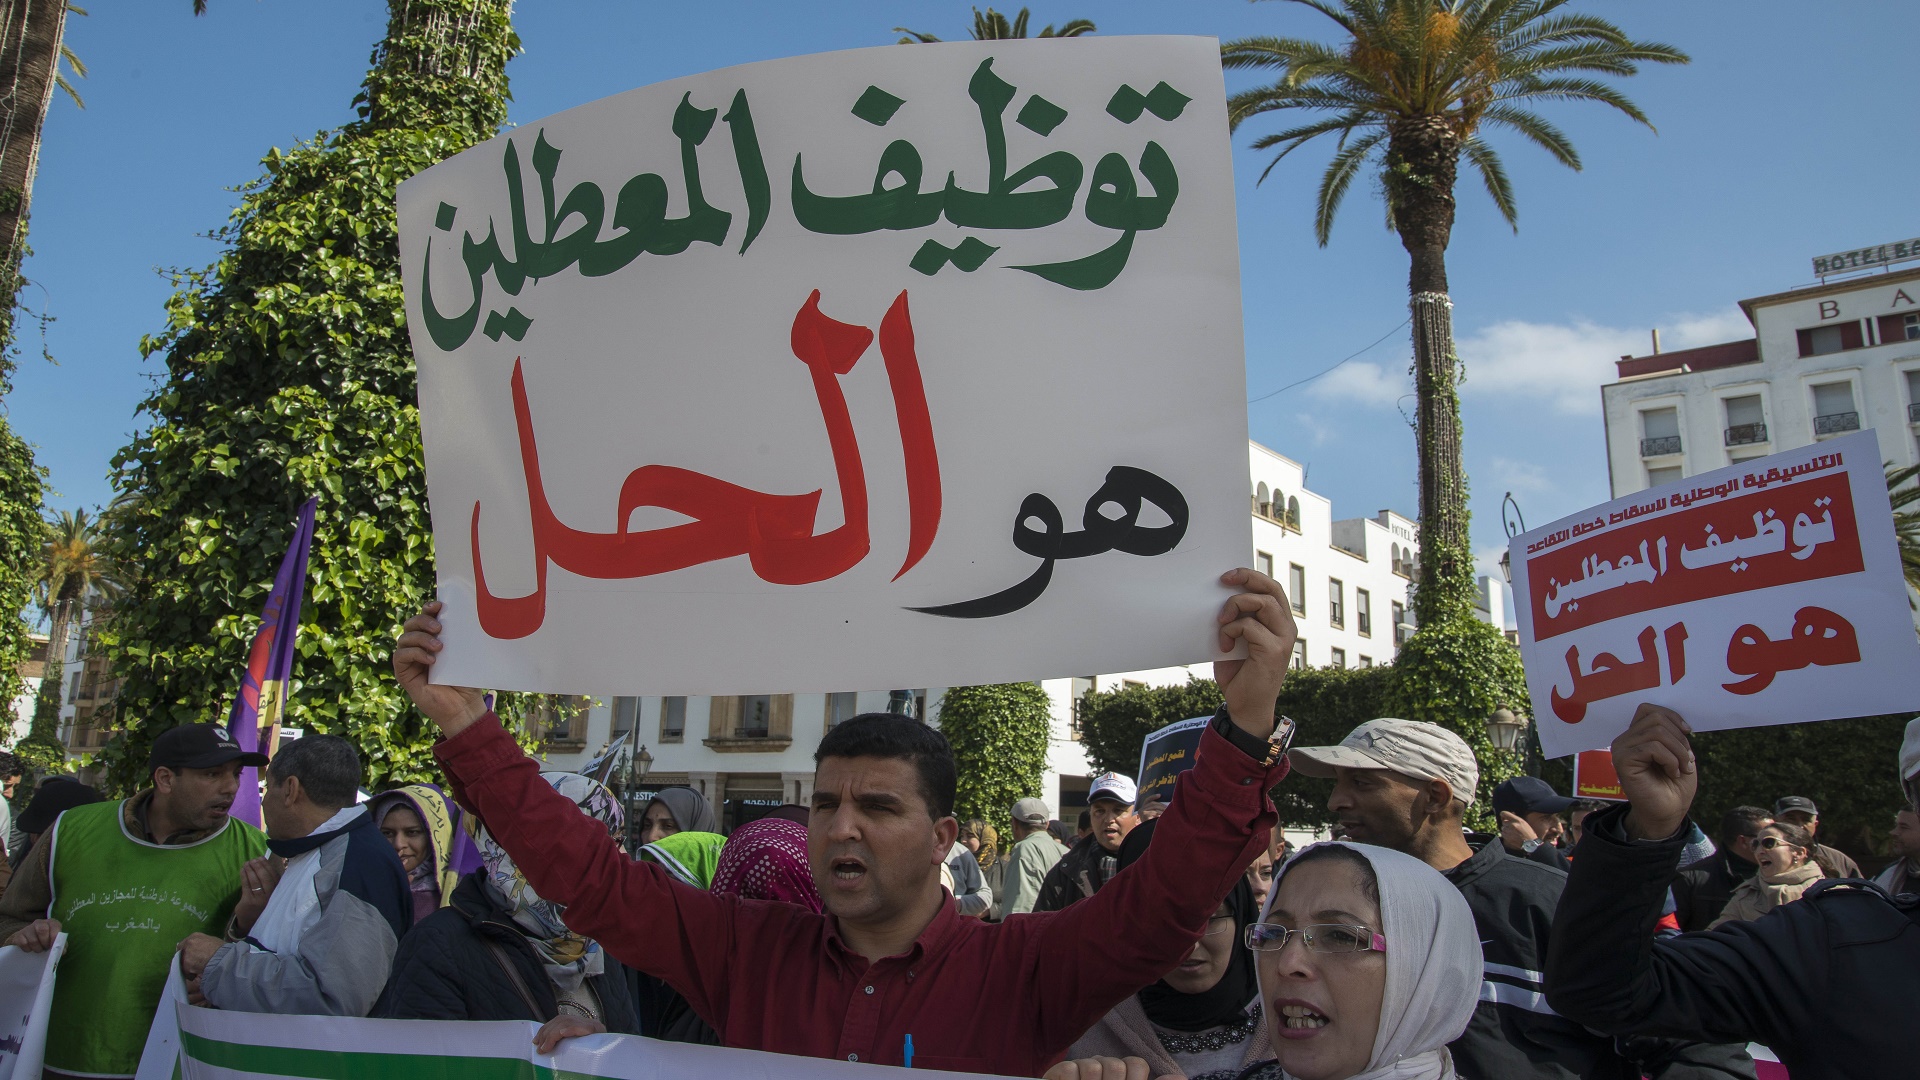 RABAT, MOROCCO - MARCH 5: Public officials gather to protest against new retirement legislation in front of the parliament building in Rabat, Morocco on March 5, 2017. (Photo by Jalal Morchidi/Anadolu Agency/Getty Images)